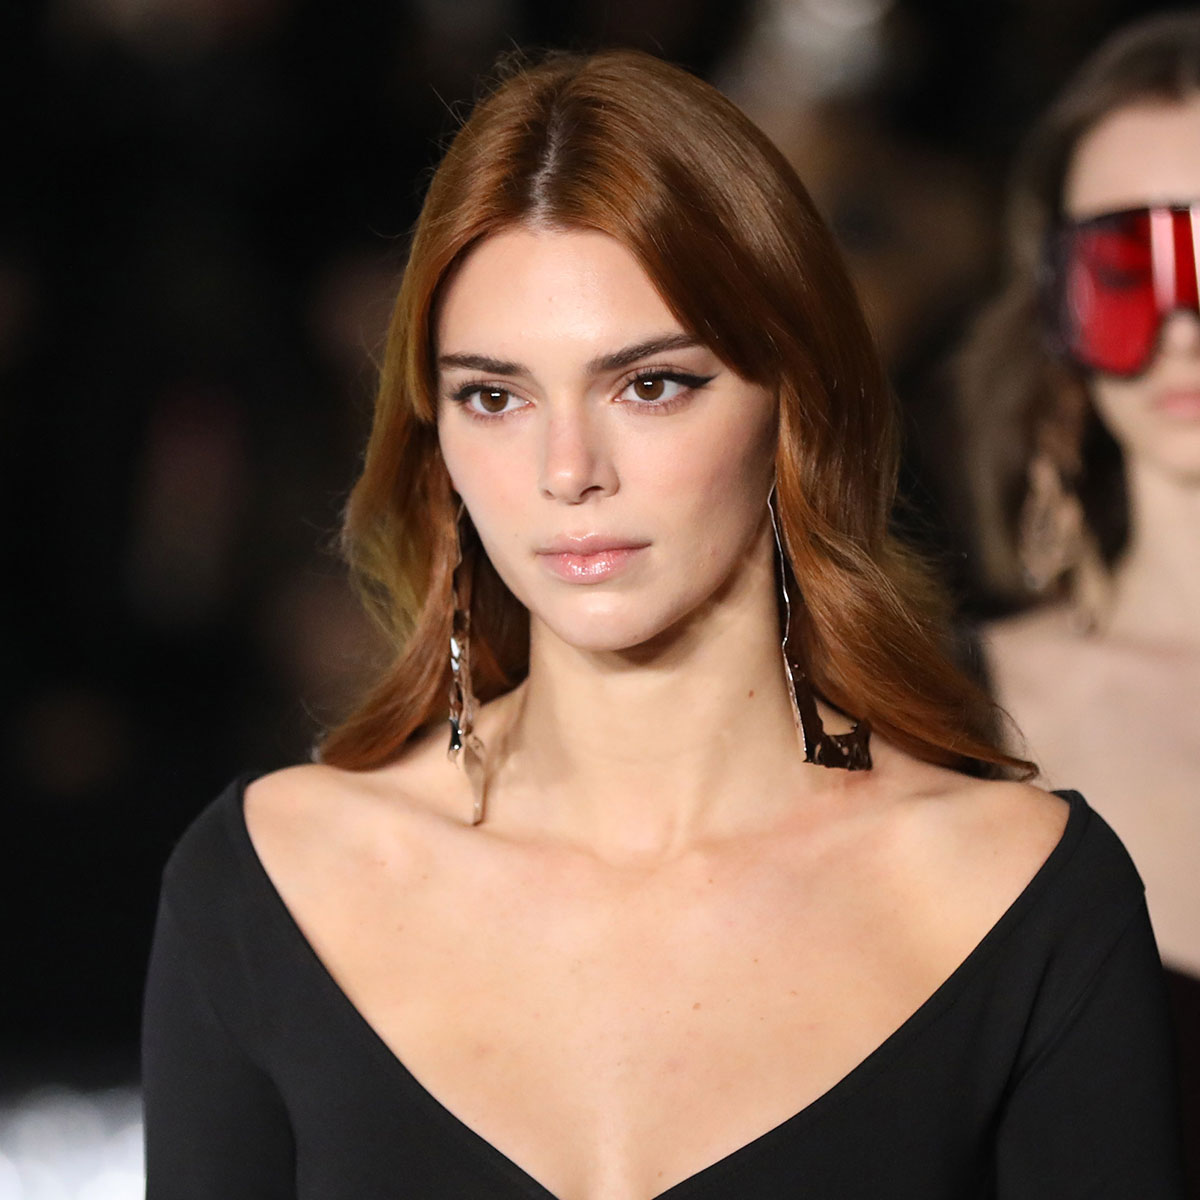 Fans Think Kendall Jenner Looks Like 'A Dream' In The Mocha Slip Dress She  Just Wore - SHEfinds